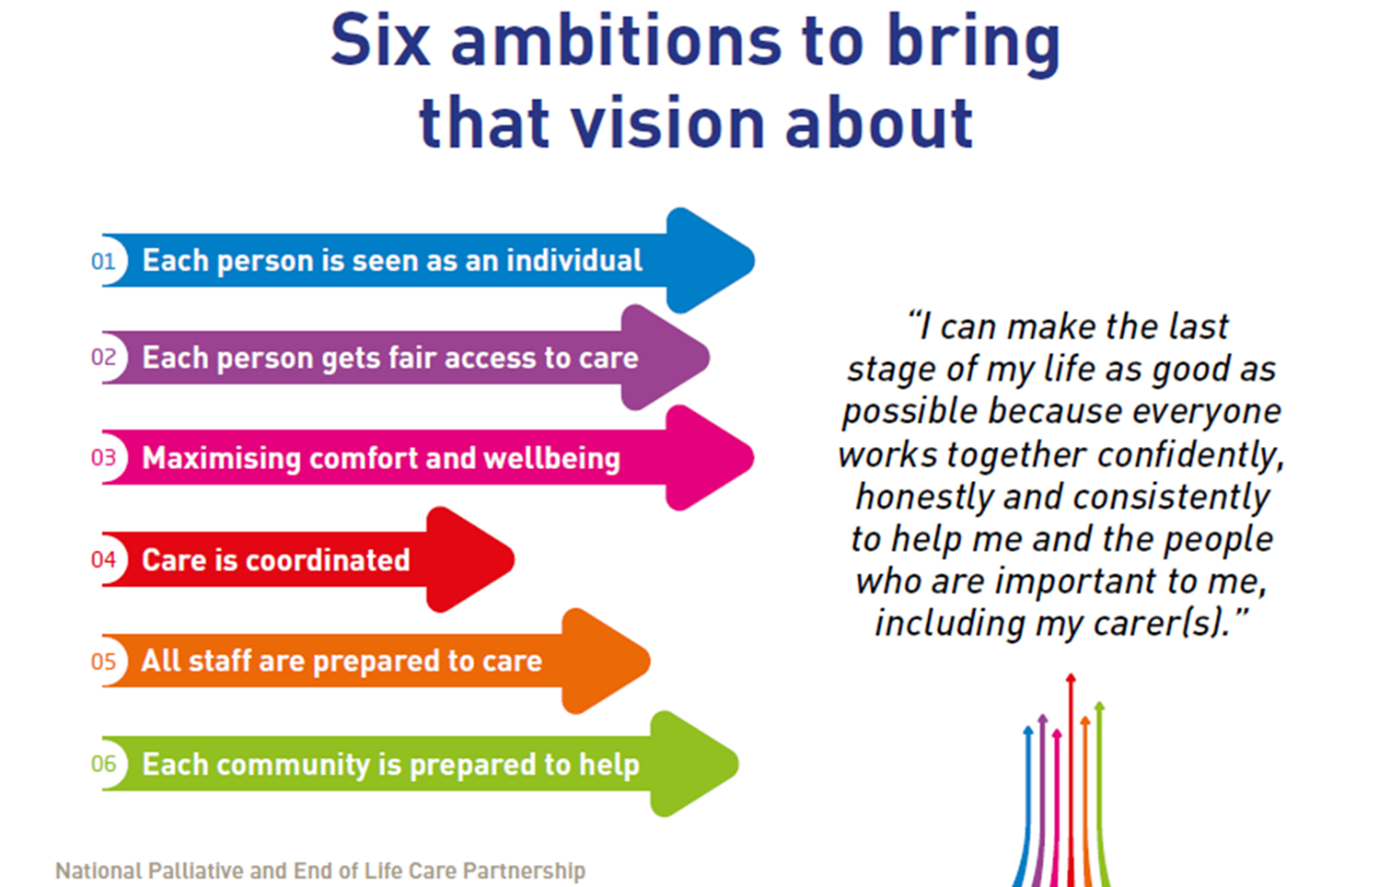 Six ambitions to bring the vision of the framework about. Each ambition is represented by a different colour arrow. 